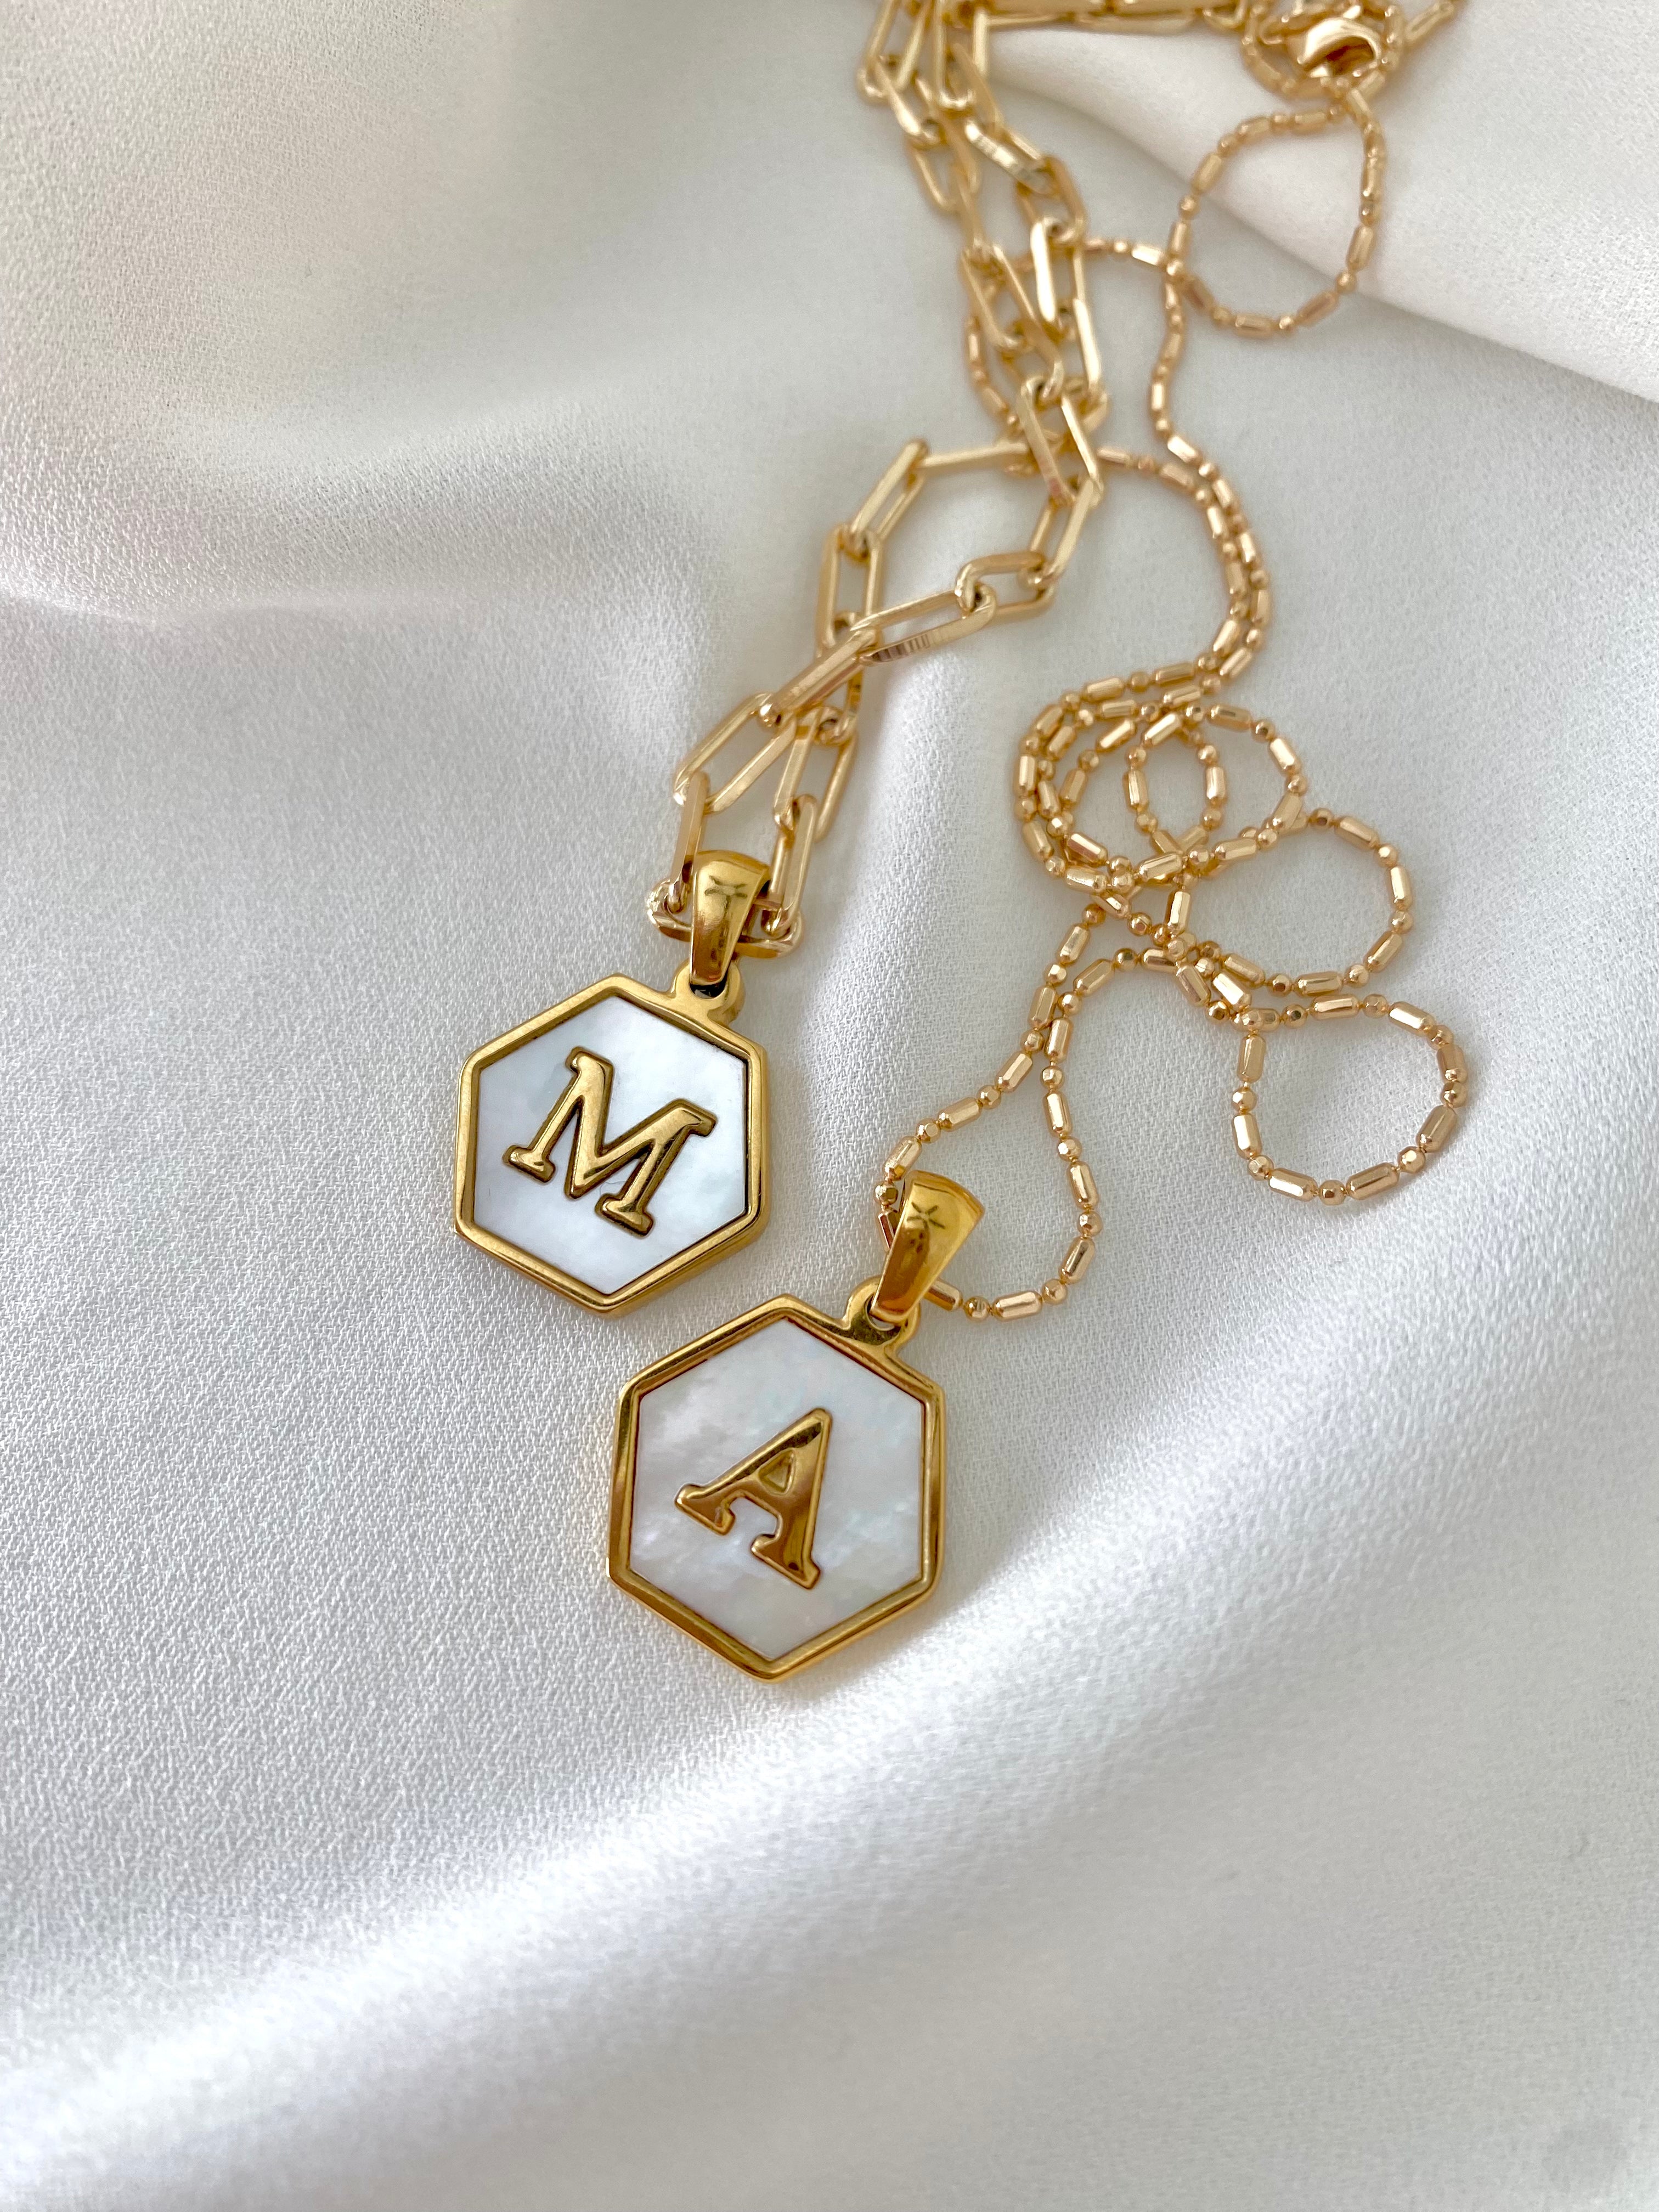 Gold Hexagon Mother of Pearl Letter Pendant Necklace - Gold Filled Chain